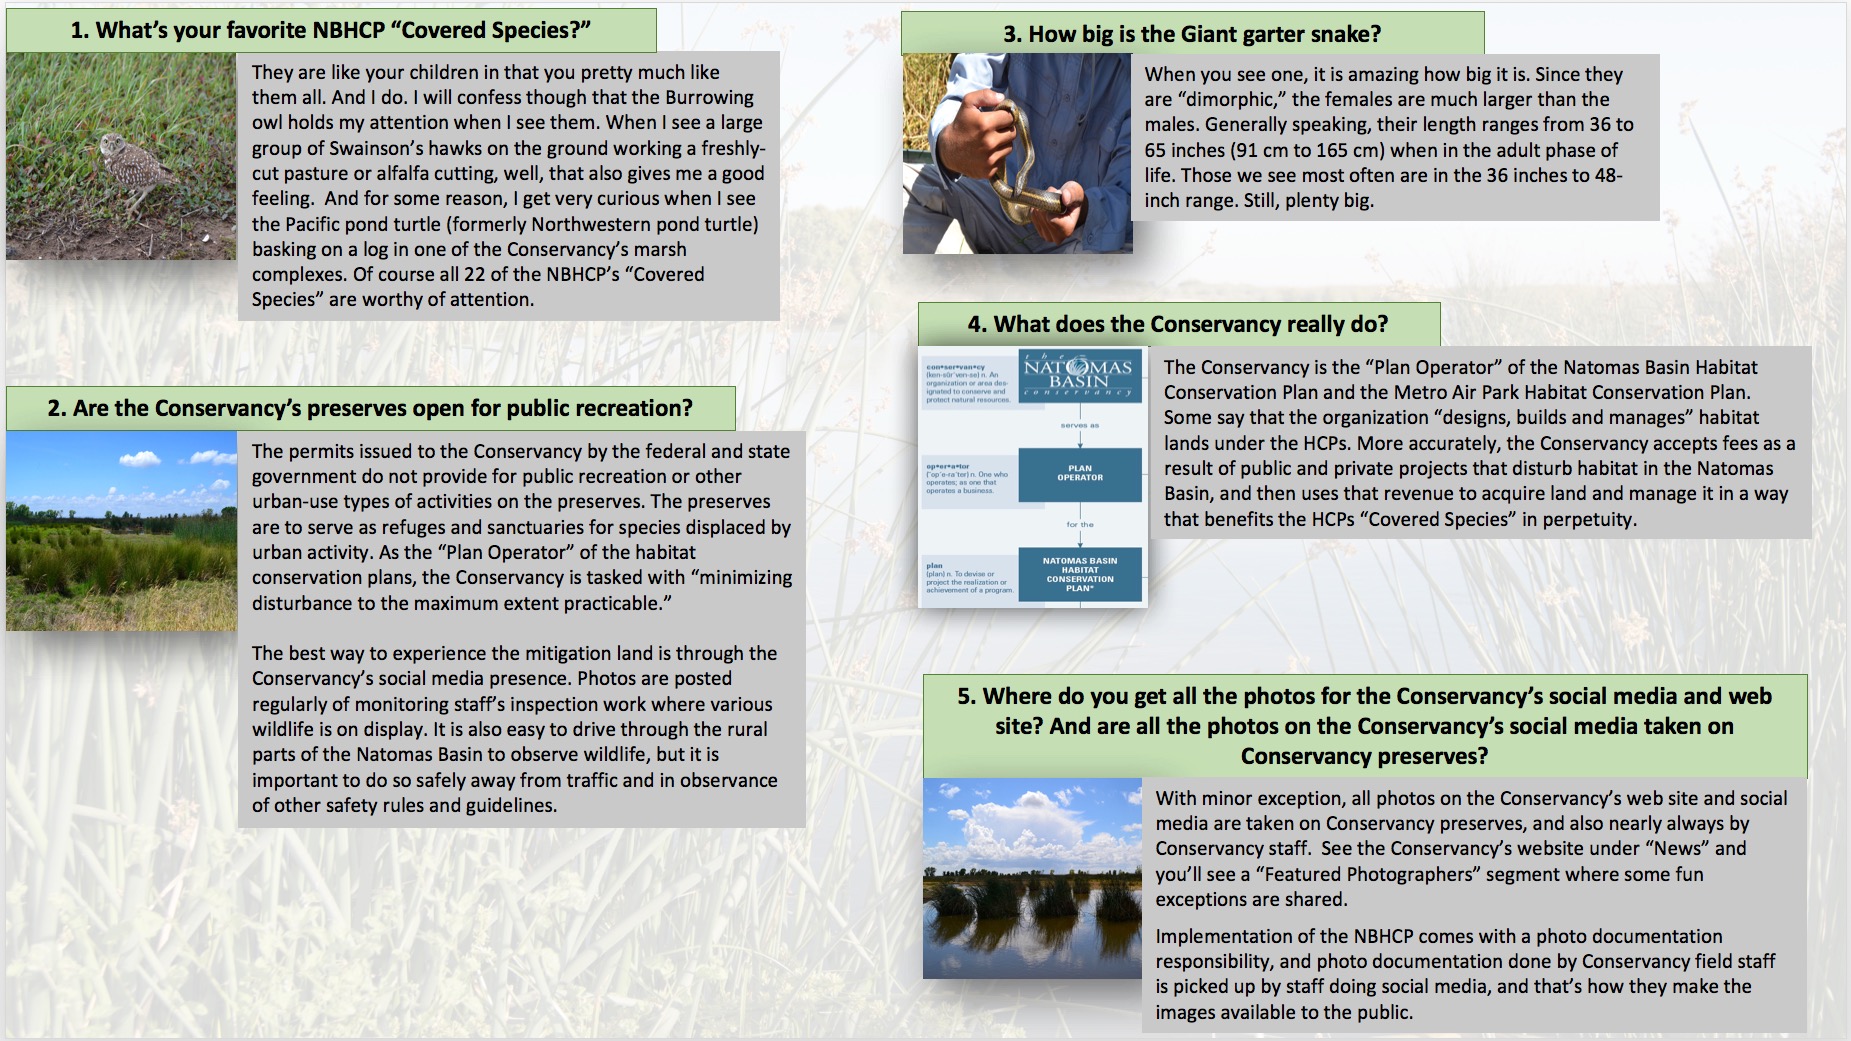 five text question and answers from TNBC Executive Director, John Roberts, with images next to each answer